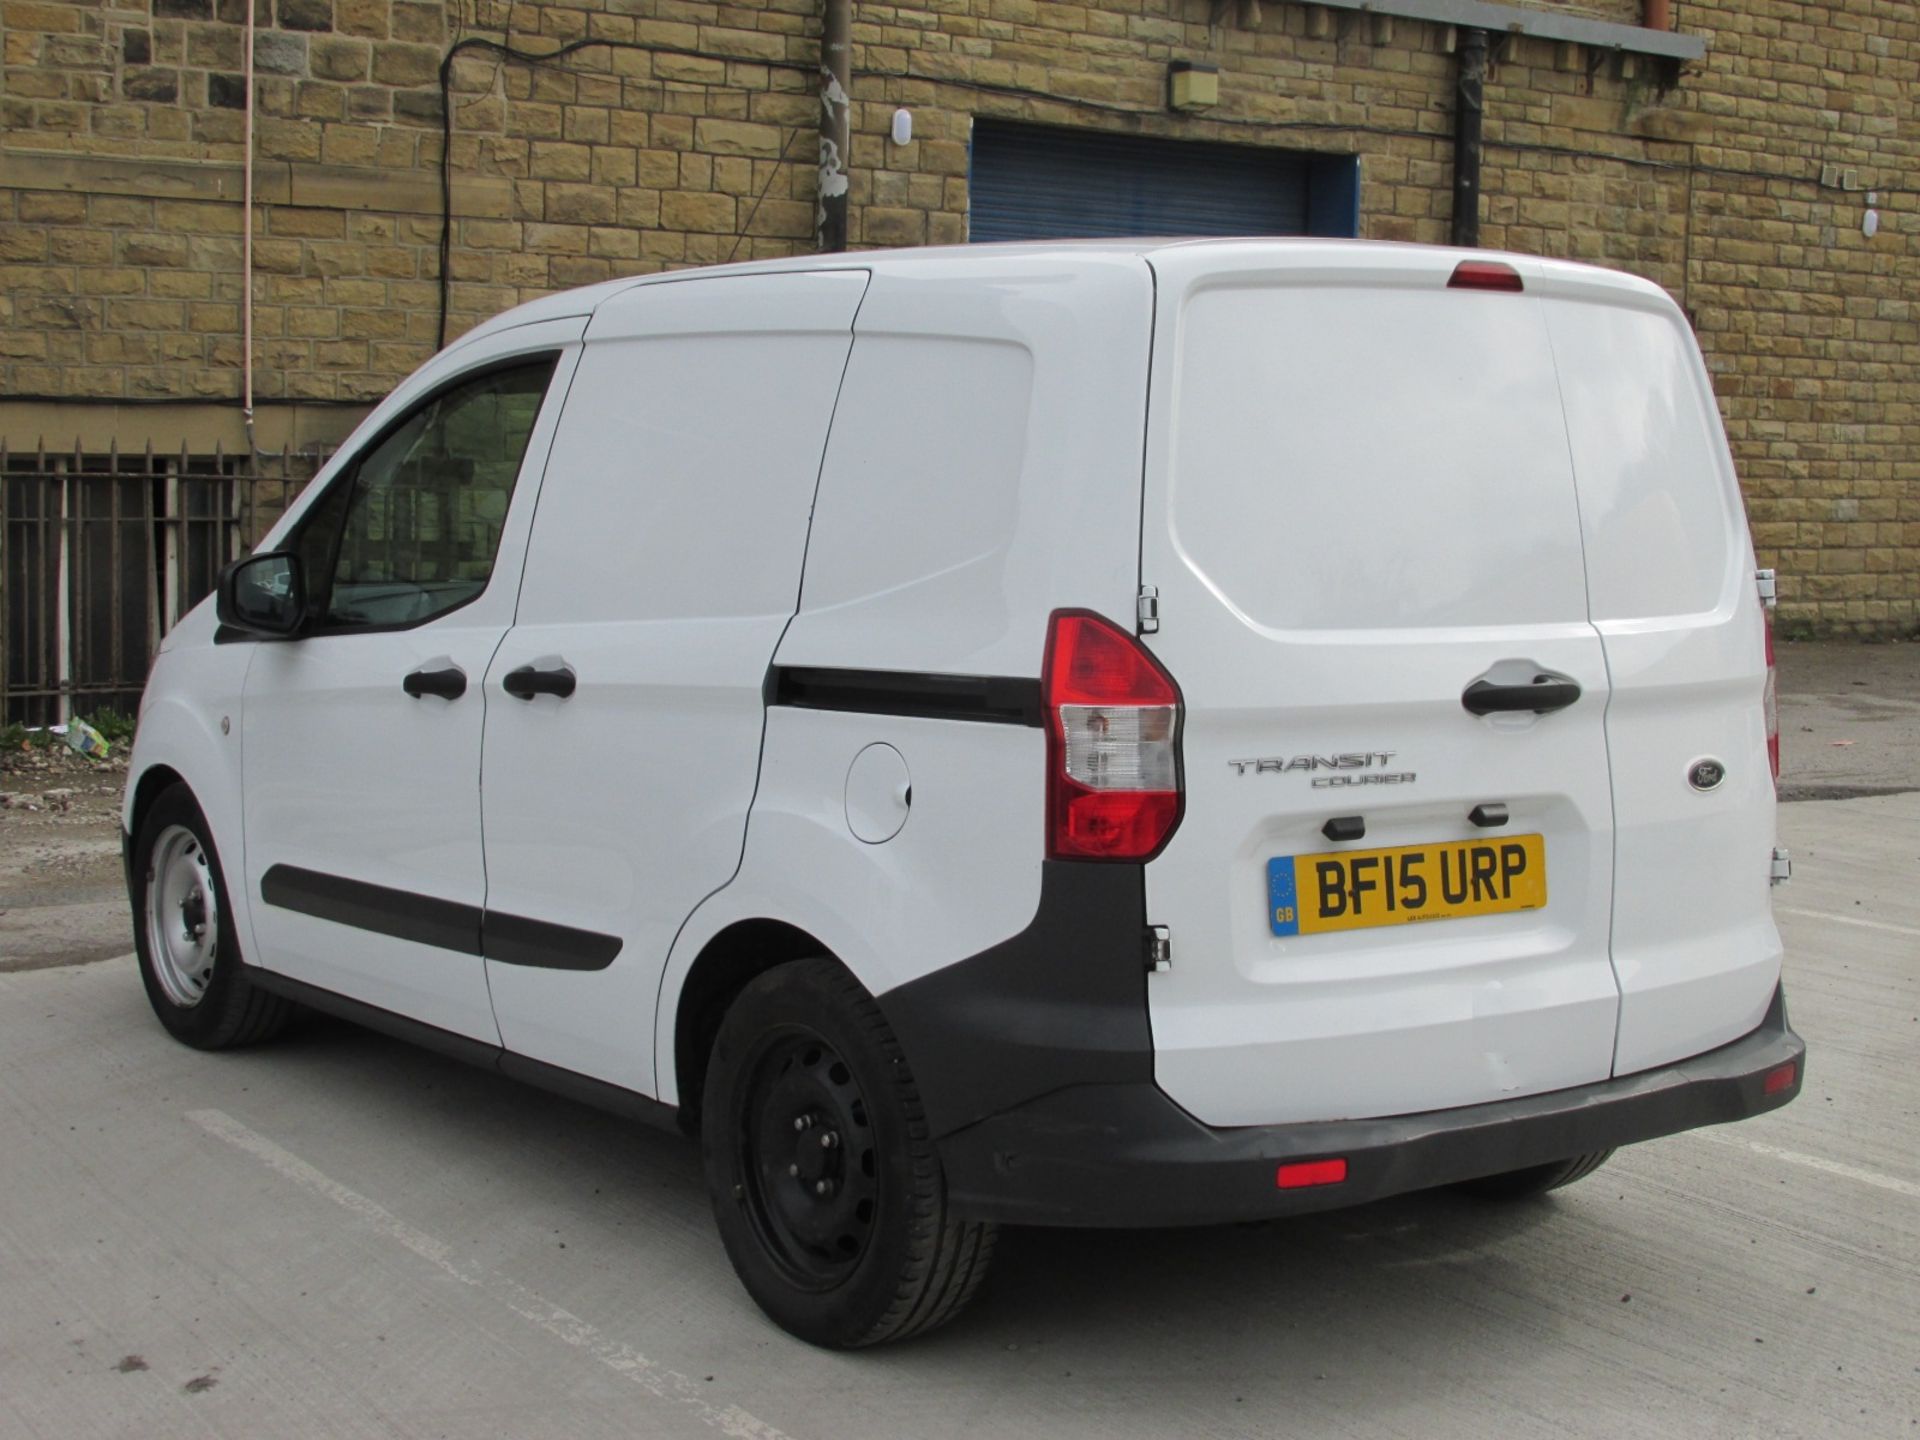 2015 Ford Transit Courier 1.5 TDCi Panel Van - 1 PLC Owner from New - FSH - Long MOT - Image 6 of 10